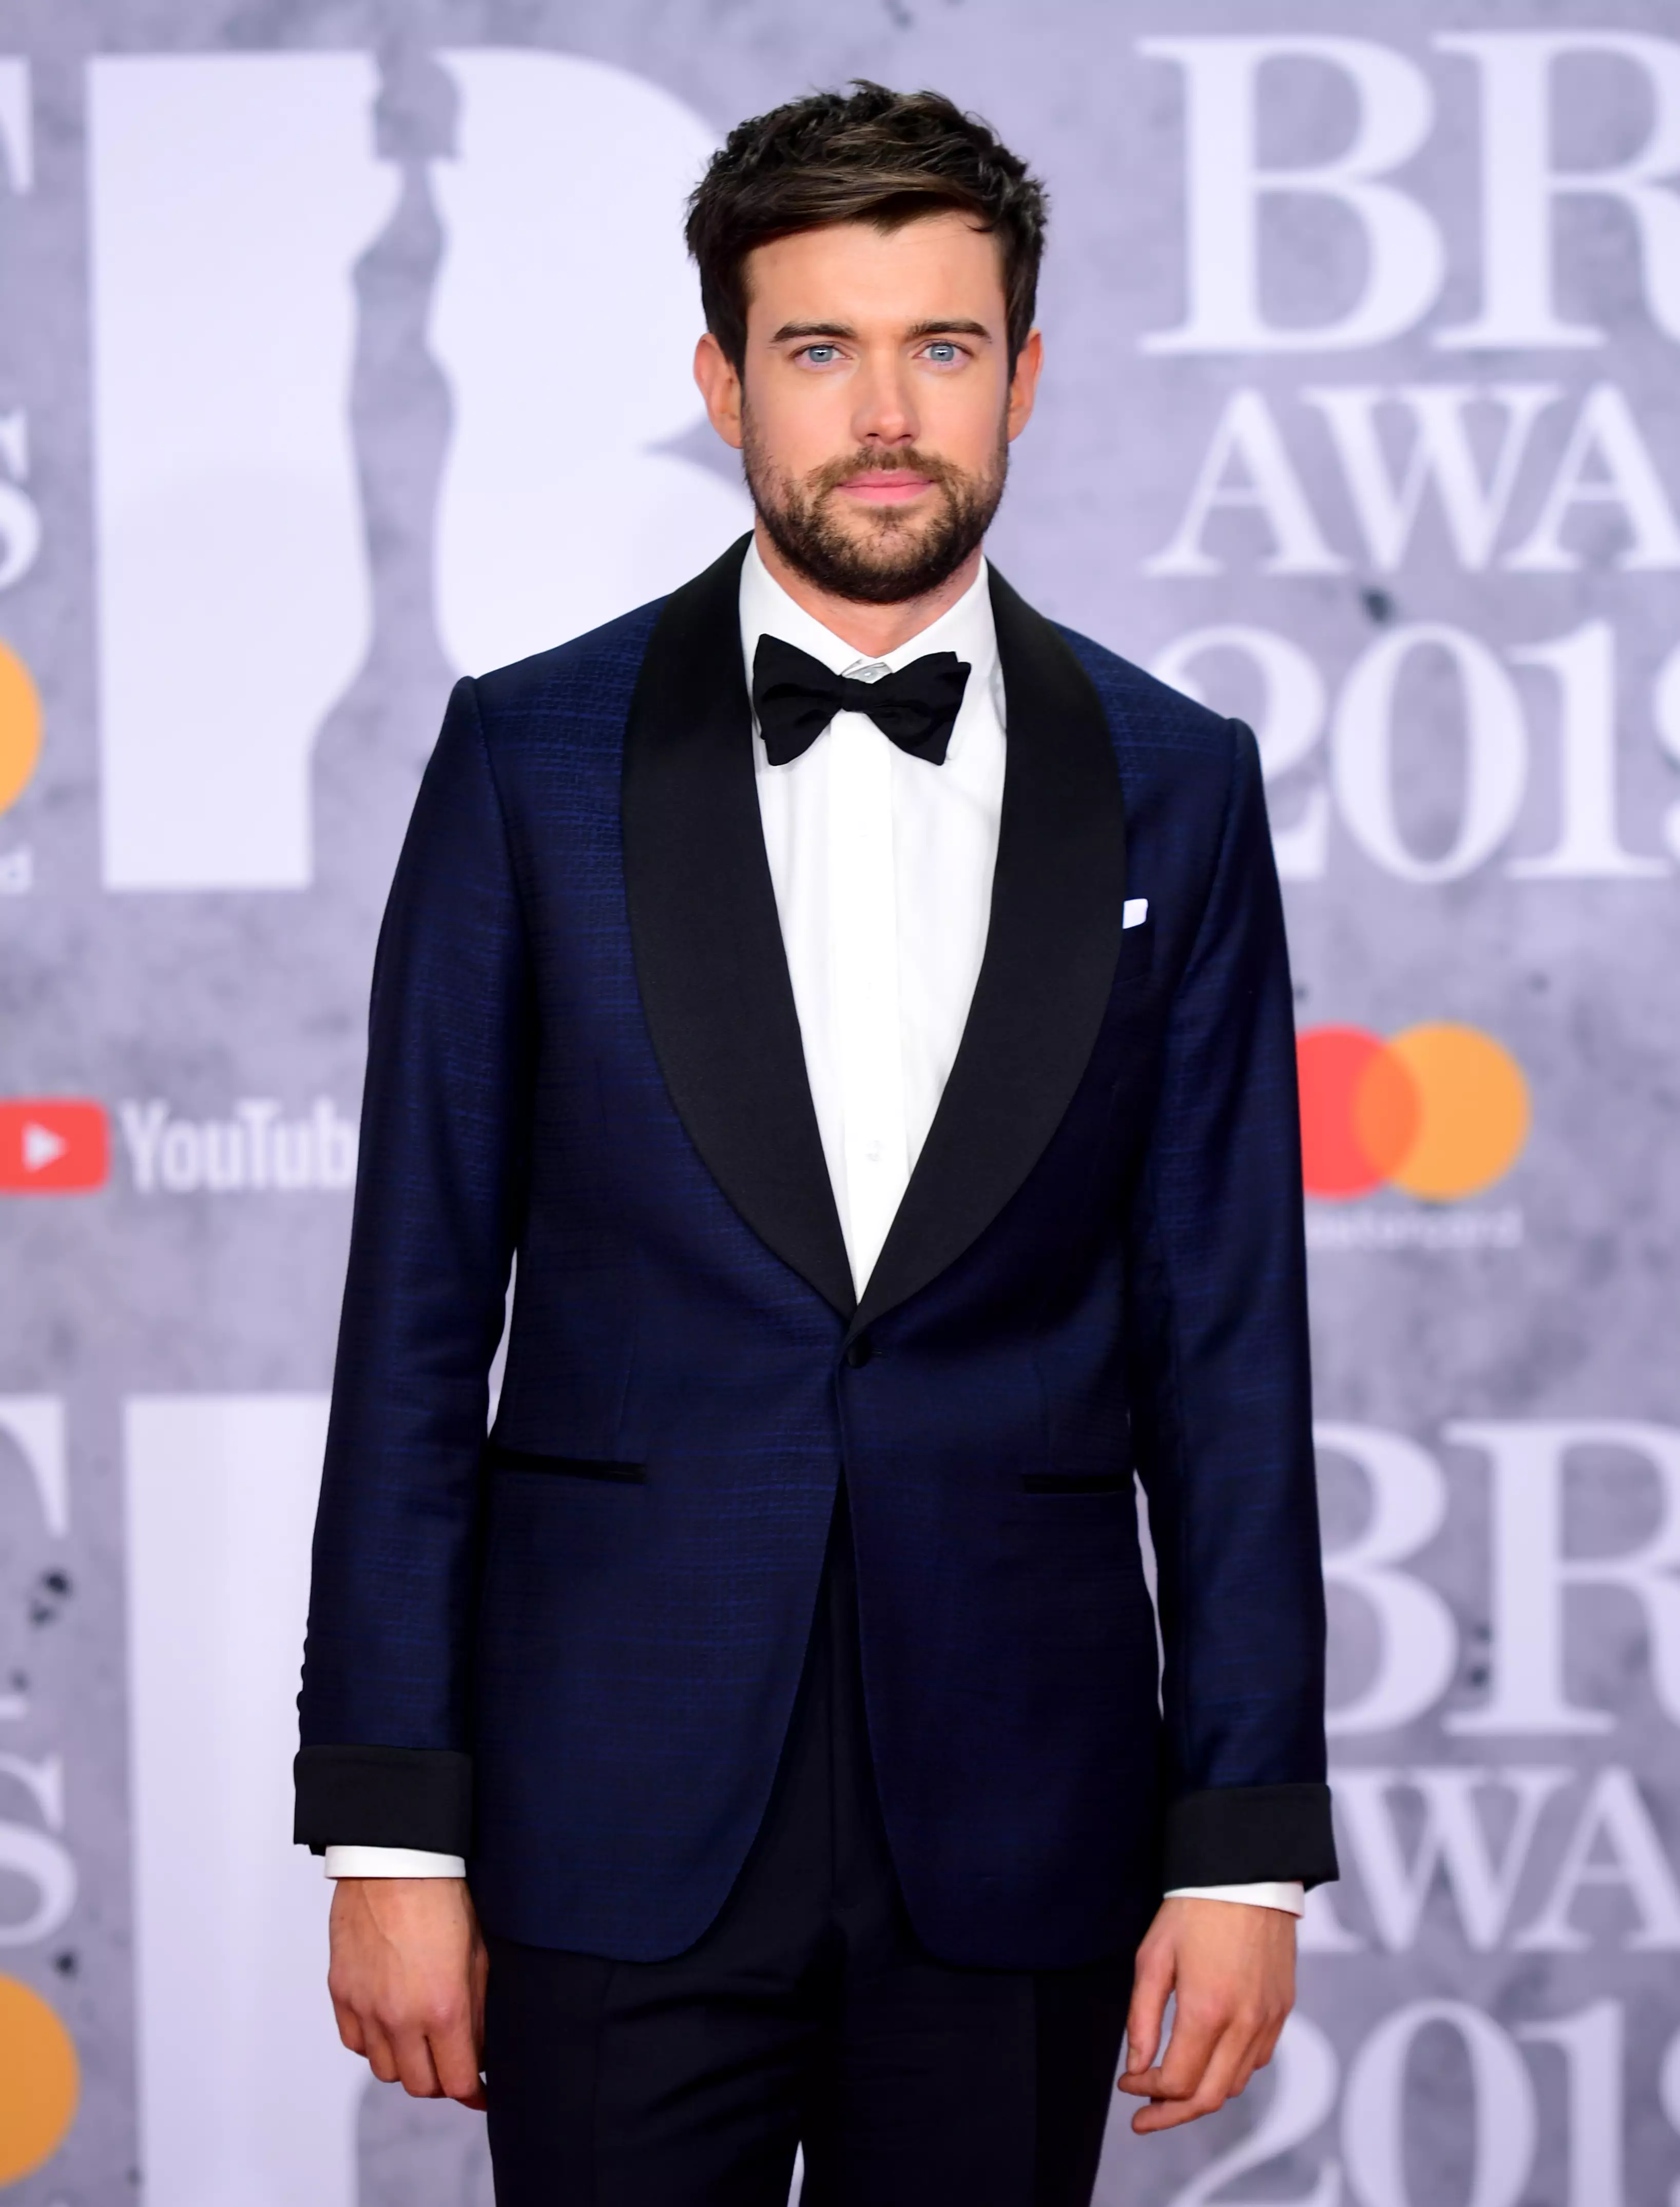 Jack Whitehall will host the BRITs (